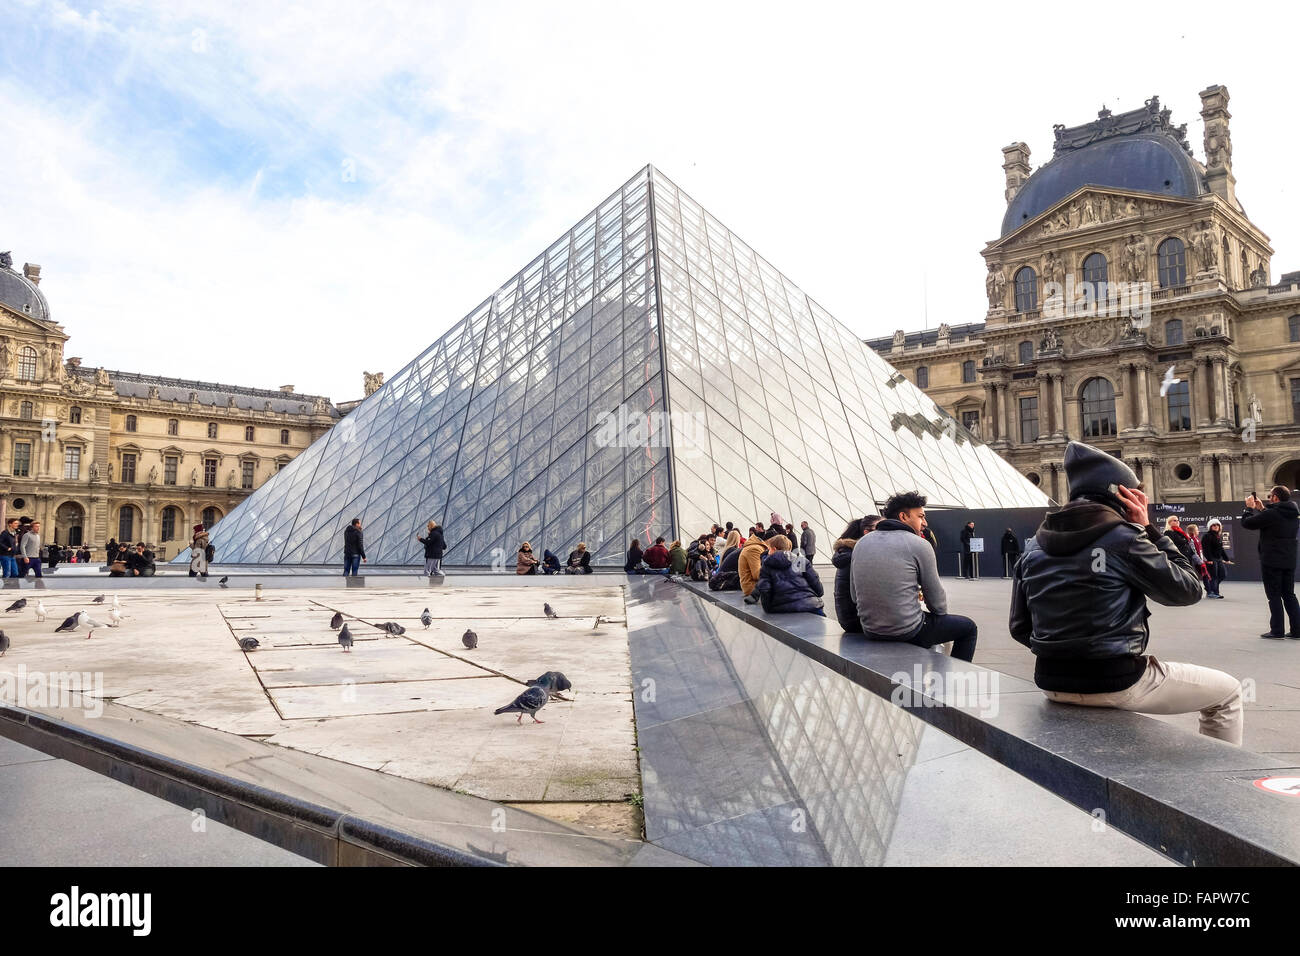 Louvre Museum and Palace with Pyramid in Paris, France. Stock Photo